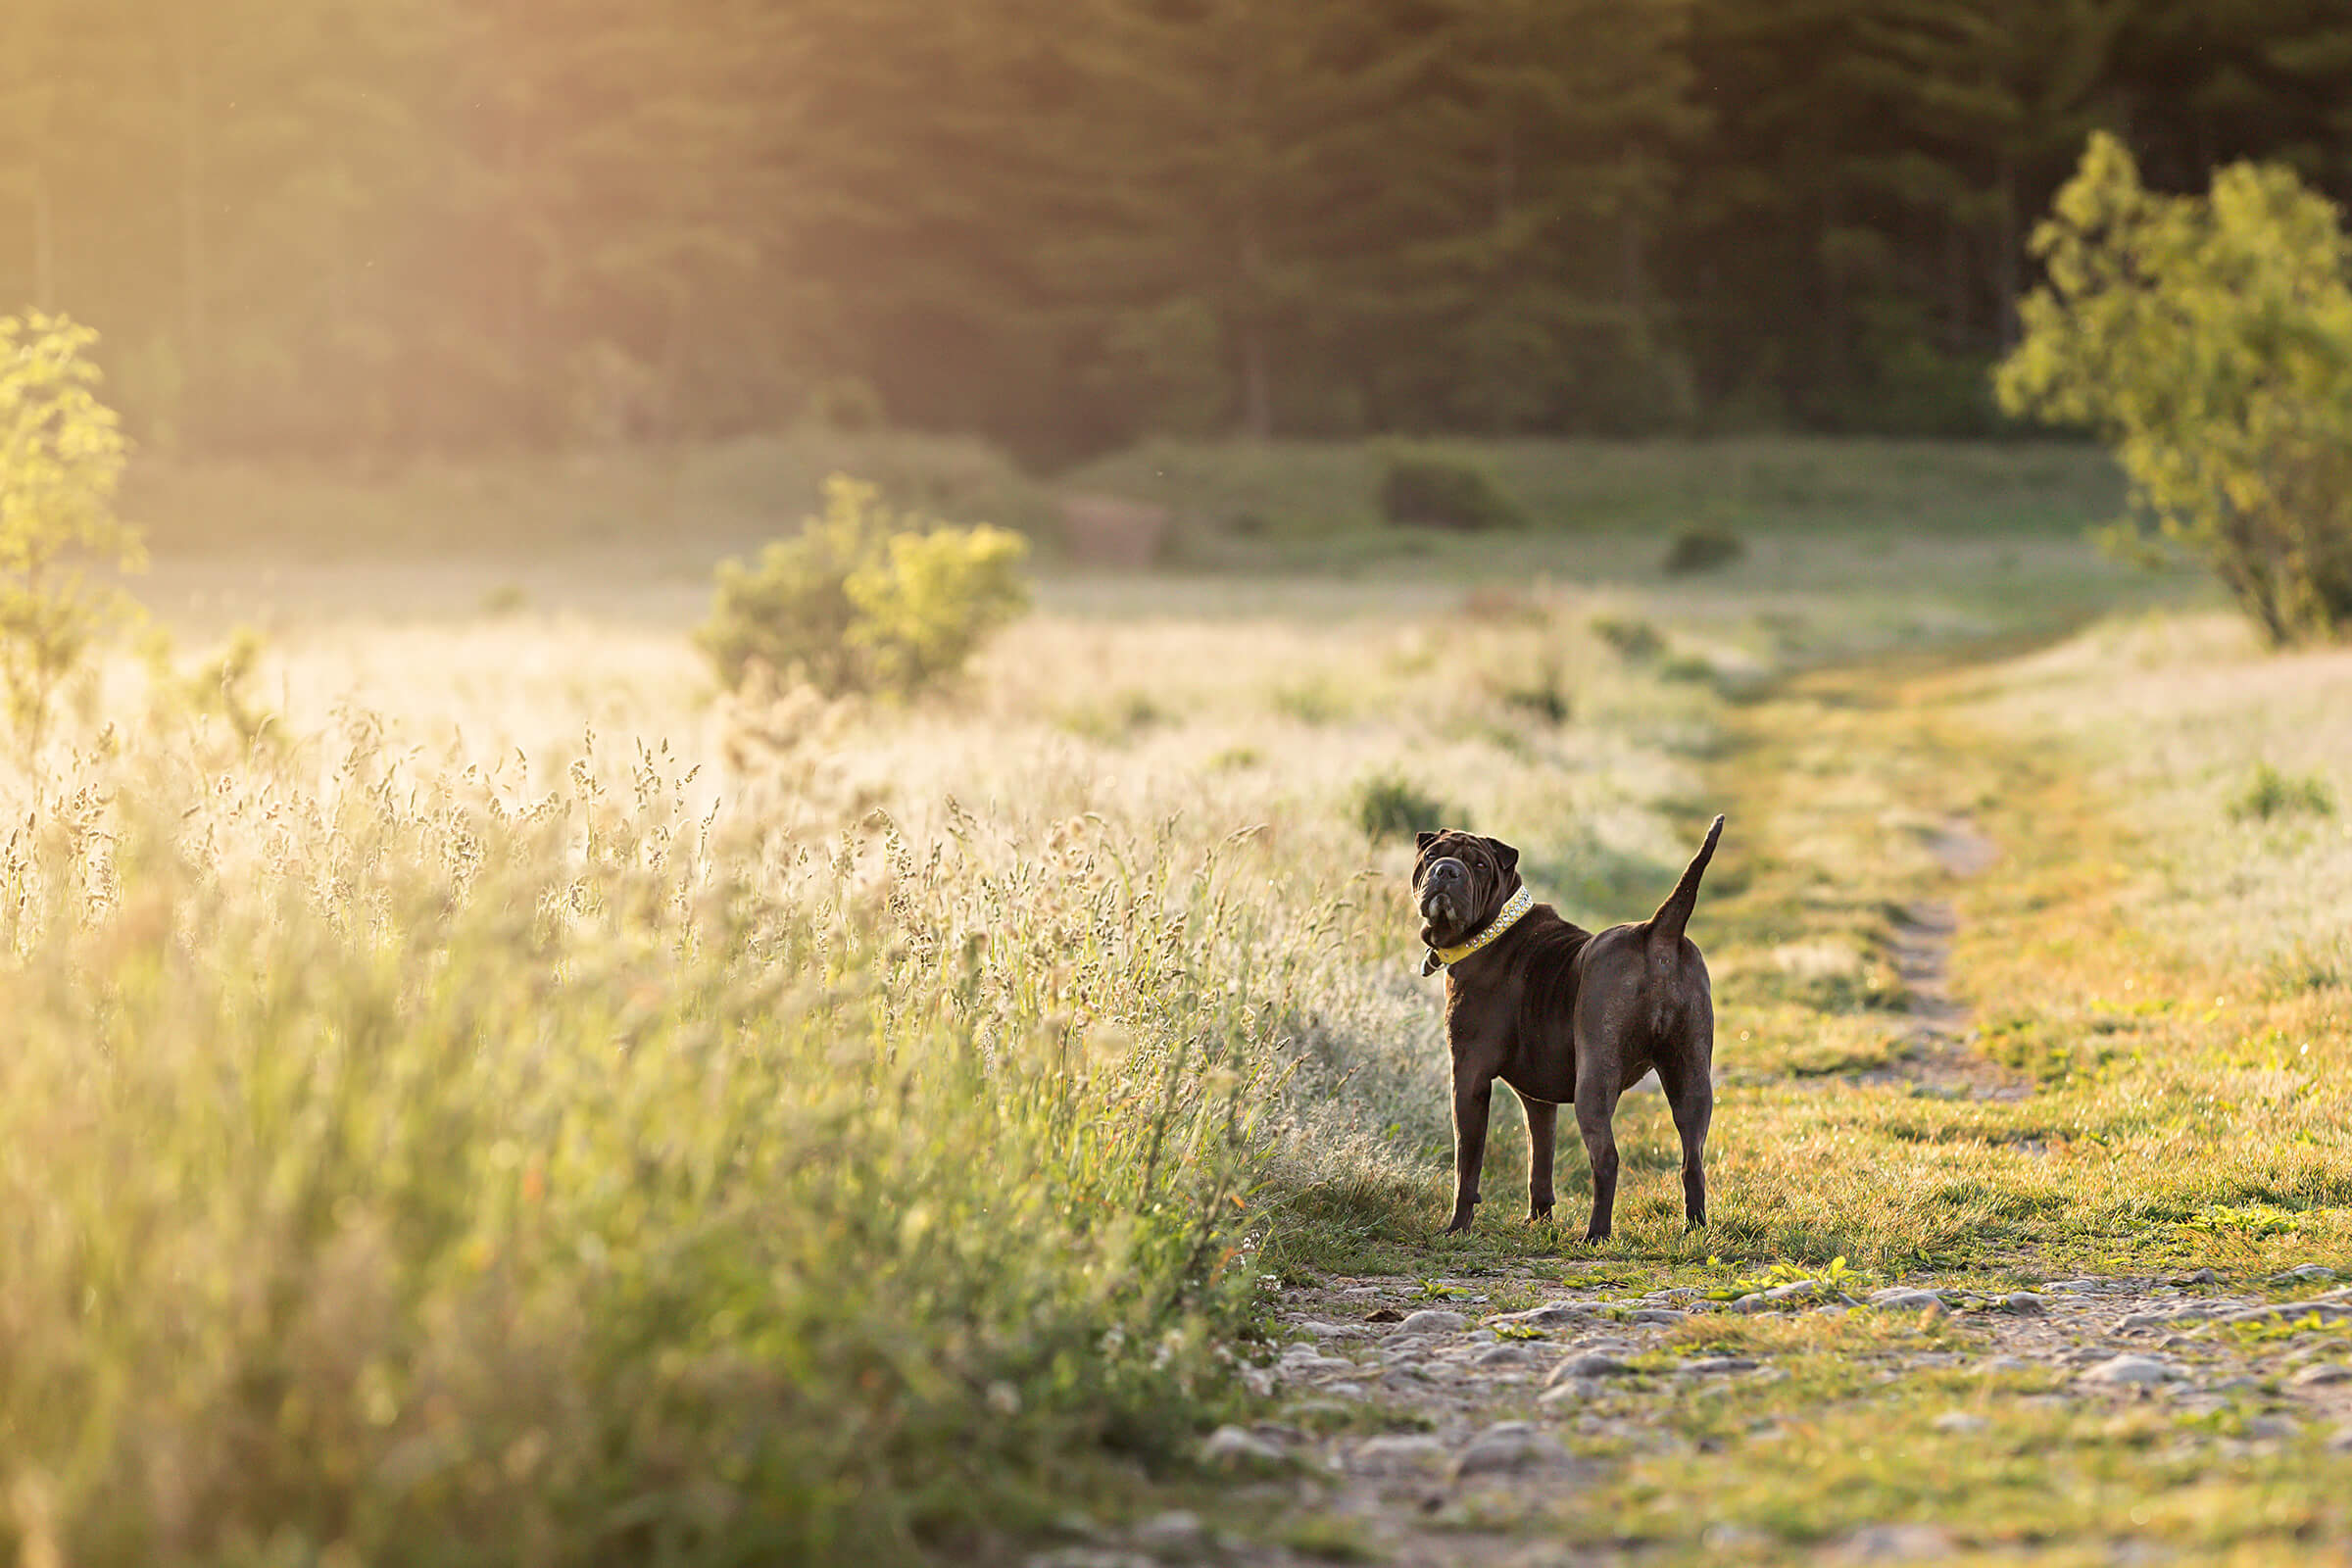 Boxer dog looking over shoulder in field bathed in light